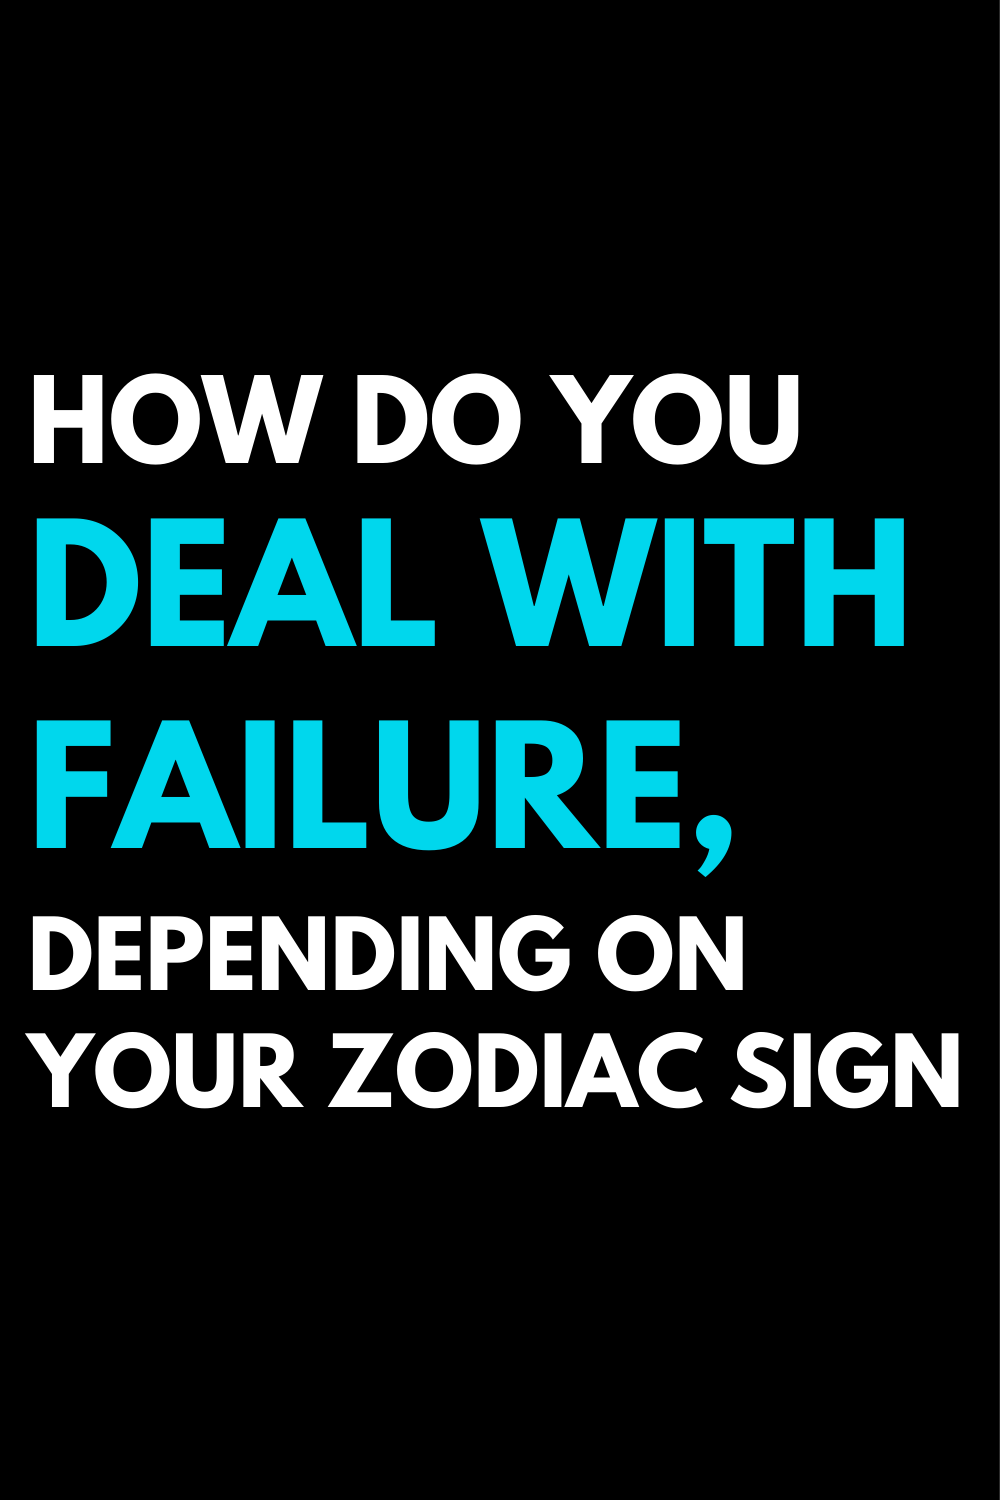 How do you deal with failure, depending on your zodiac sign